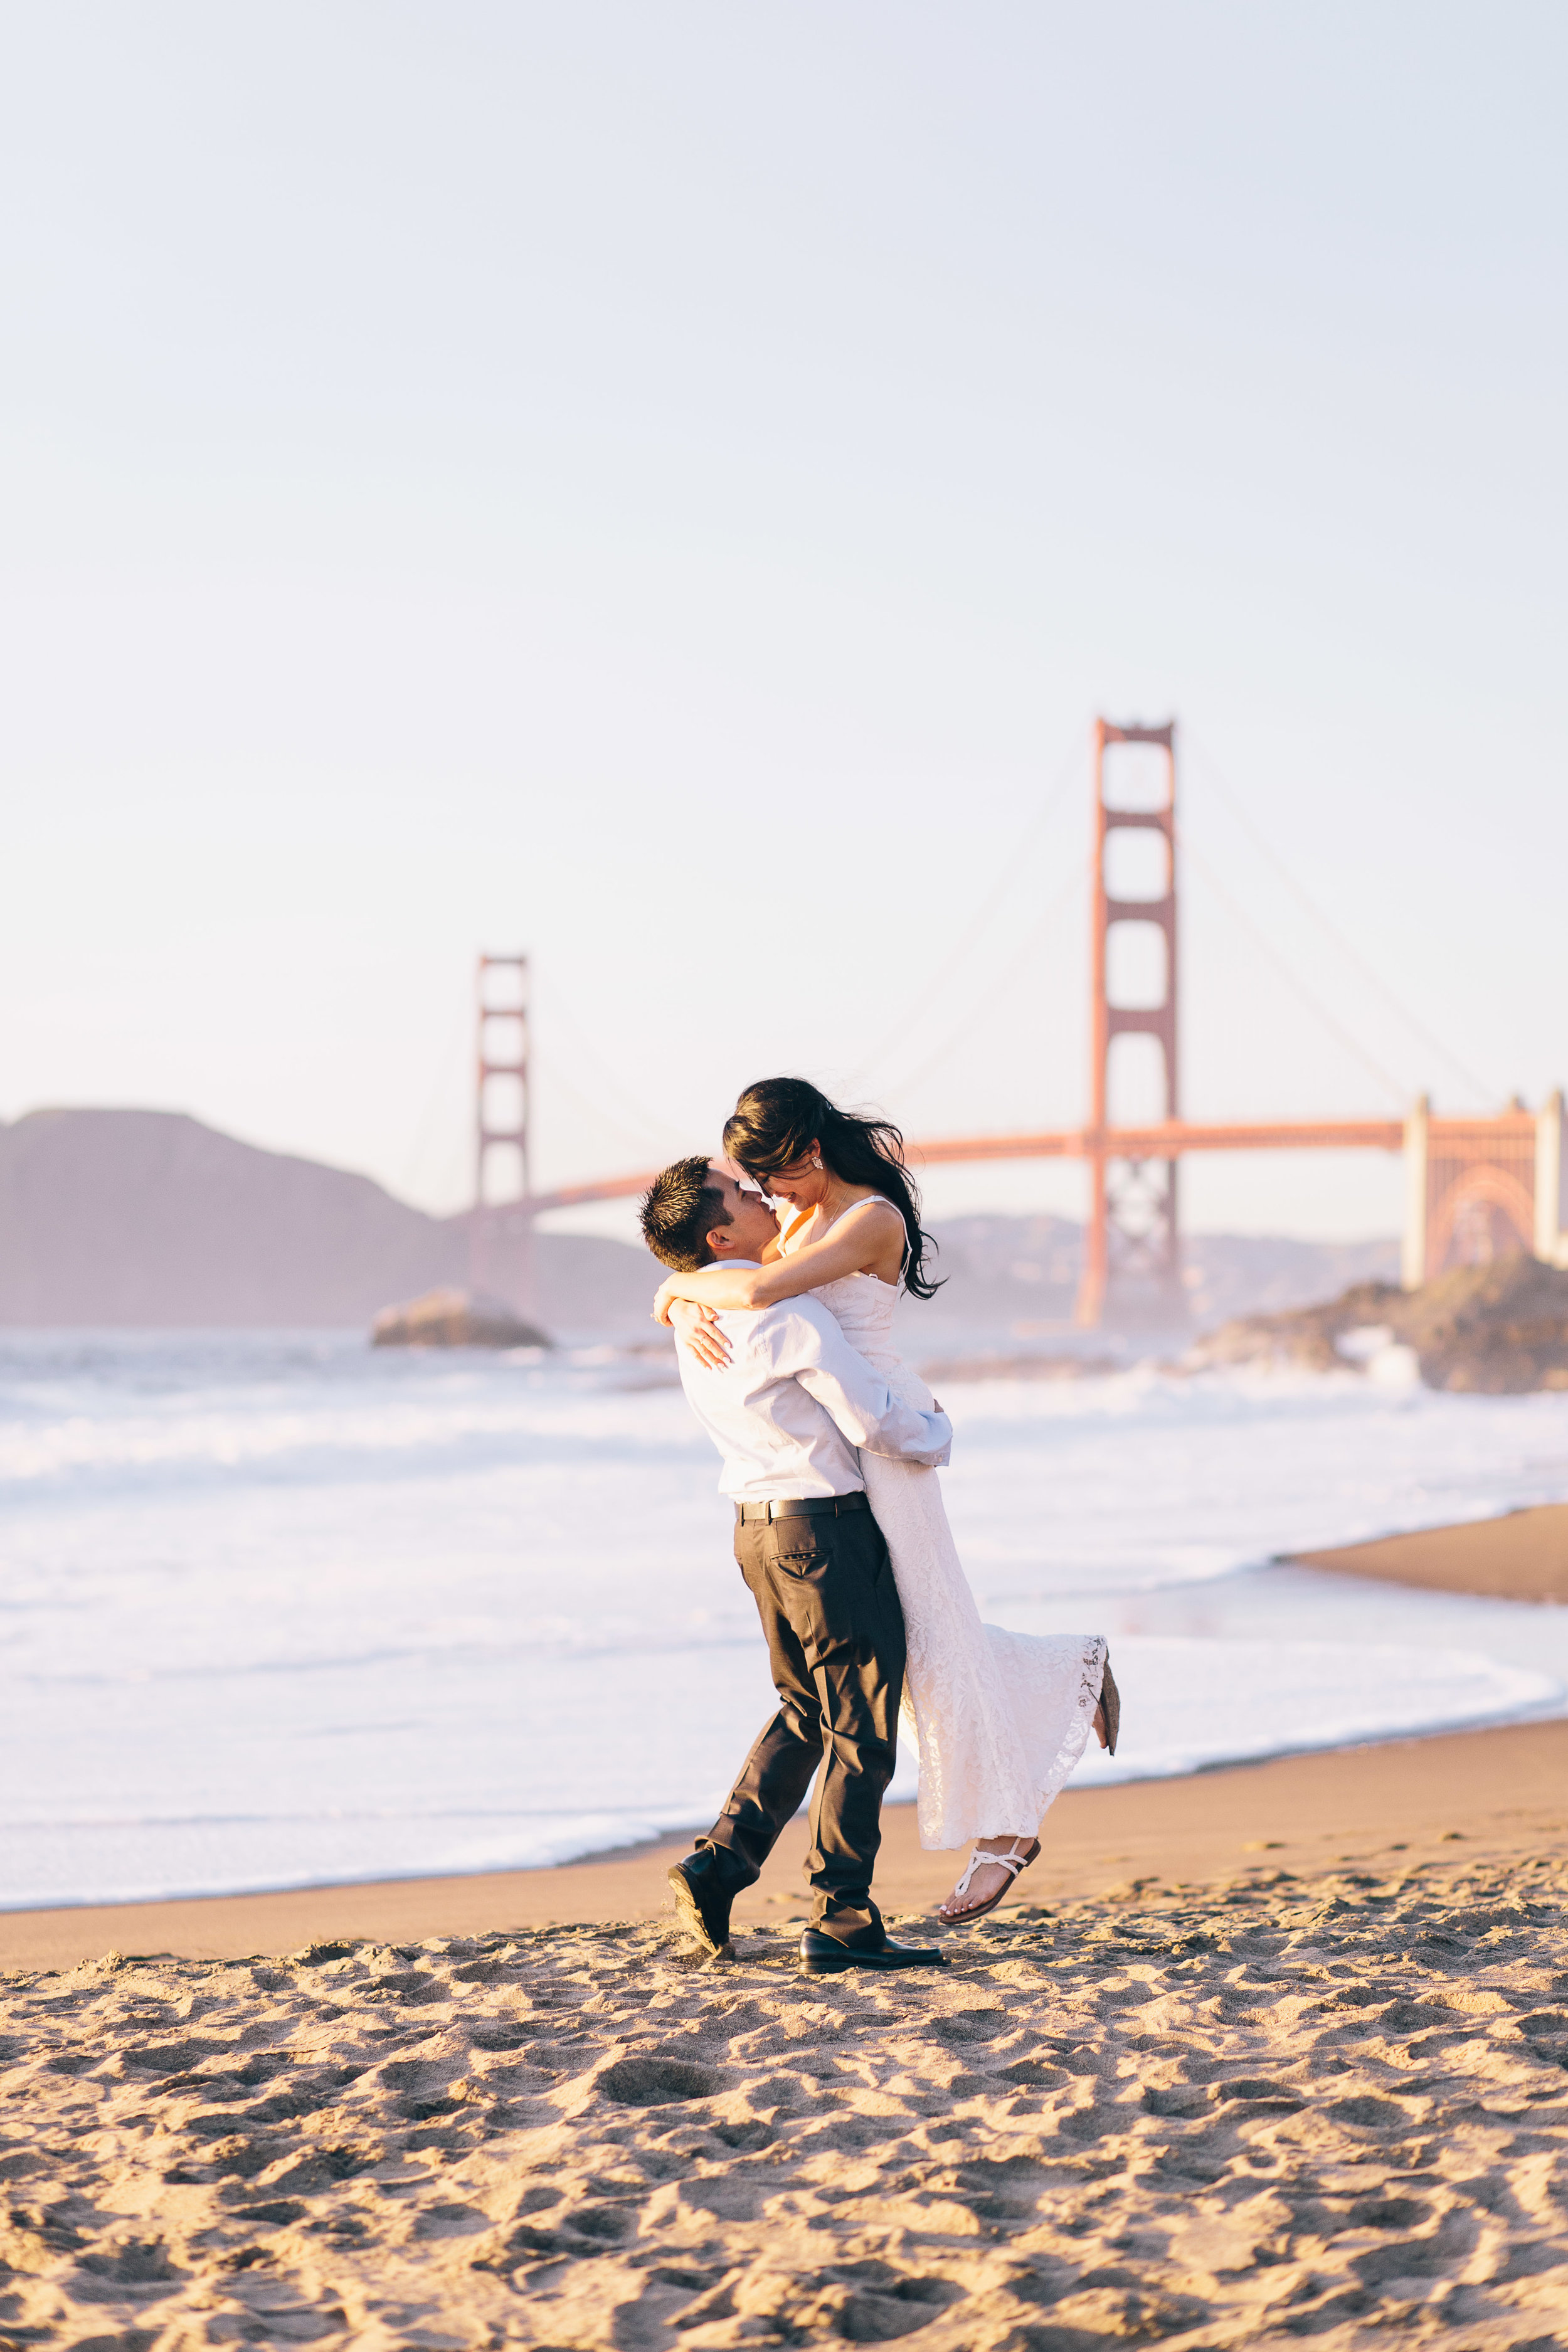 Best Engagement Photo Locations in San Francisco - Baker Beach Engagement Photos by JBJ Pictures (18).jpg